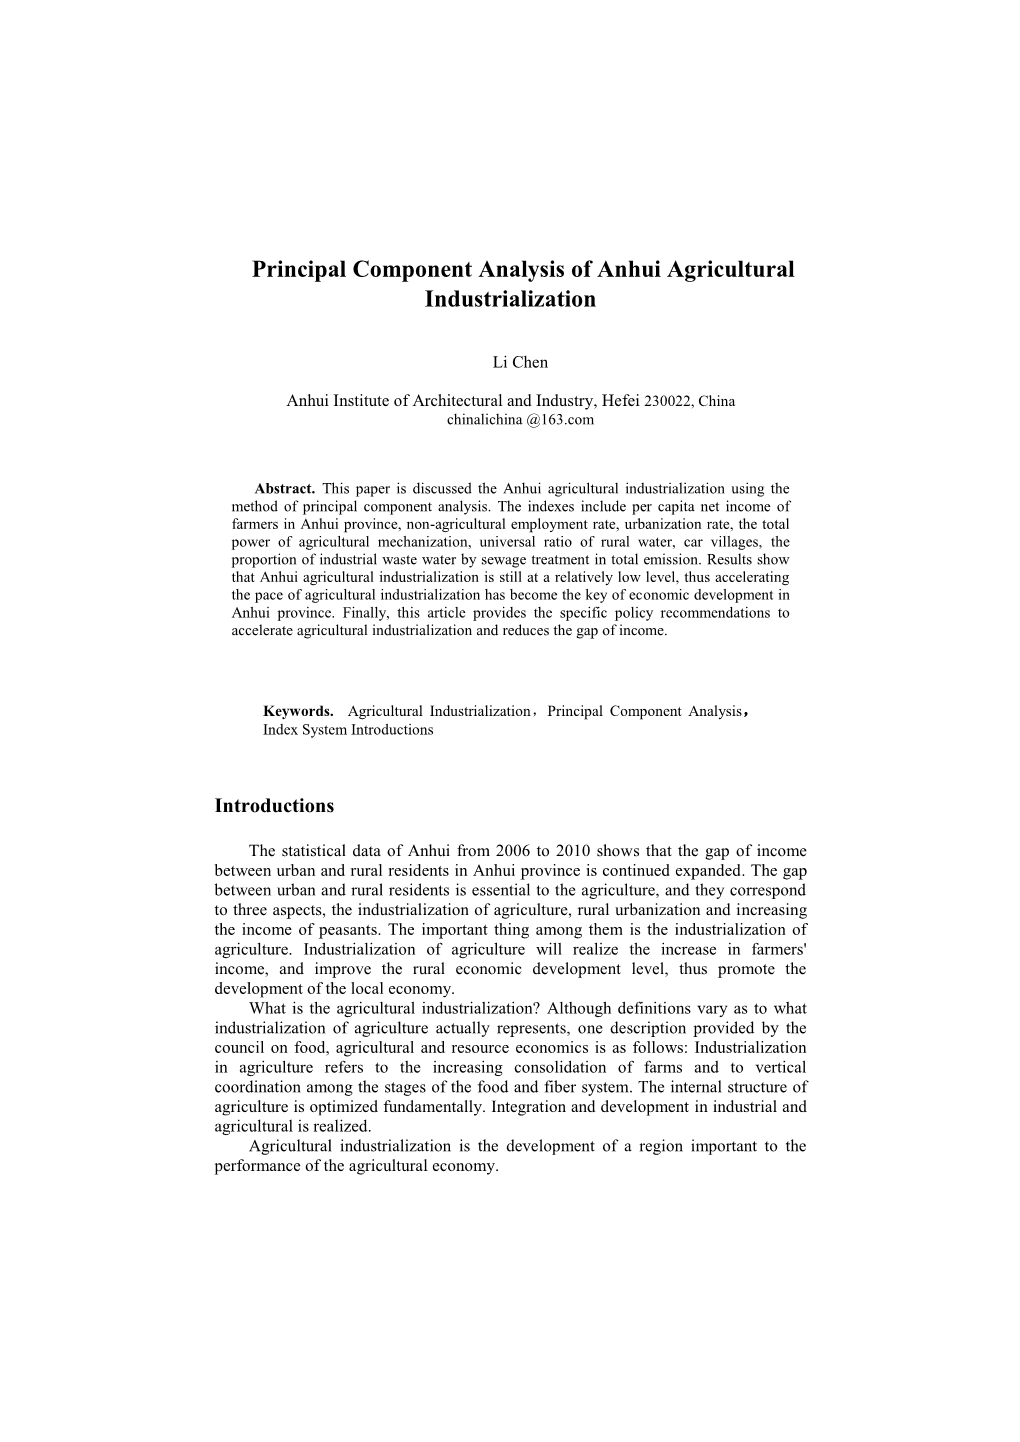 Principal Component Analysis of Anhui Agricultural Industrialization